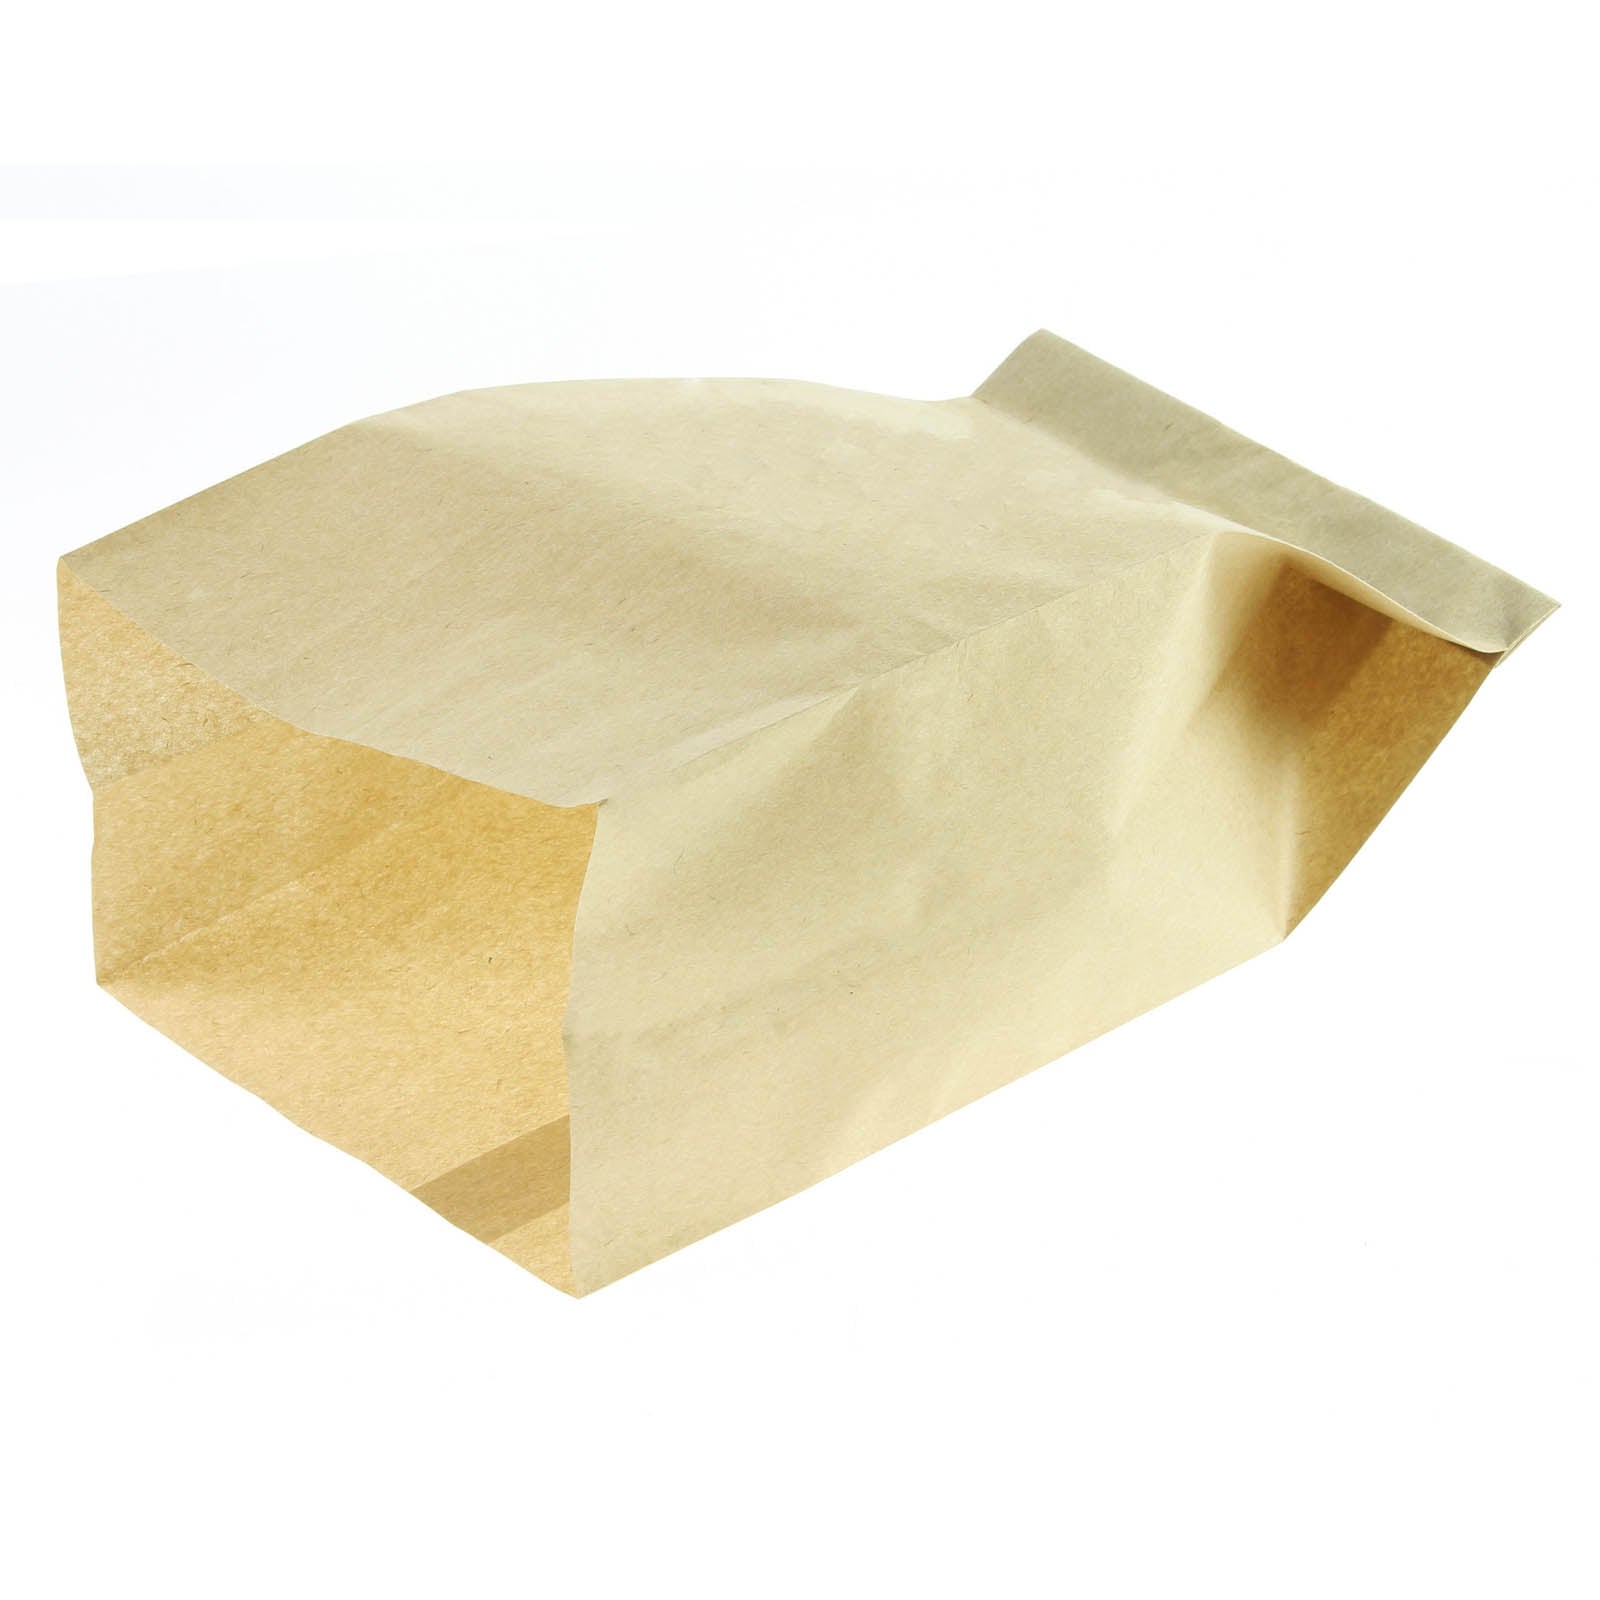 Vacuum Cleaner Dust Bag Filters for EARLEX Combivac (20 Bags) WD0029, WD1000, WDACC1, SC1255